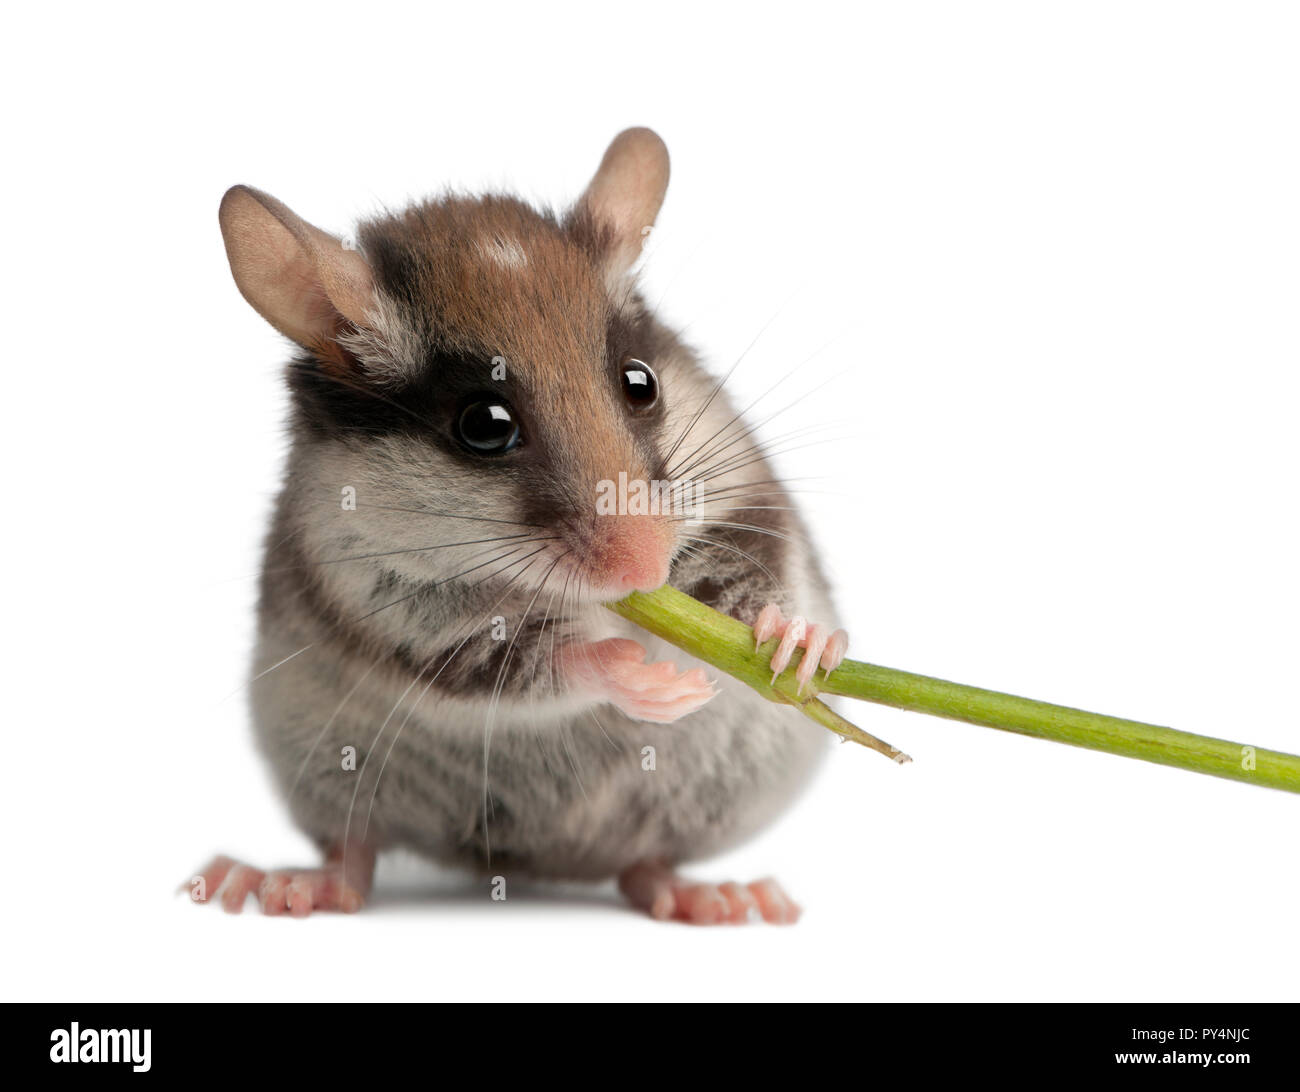 Garden Dormouse, Eliomys quercinus, 2 months old, holding and eating stem in front of white background Stock Photo